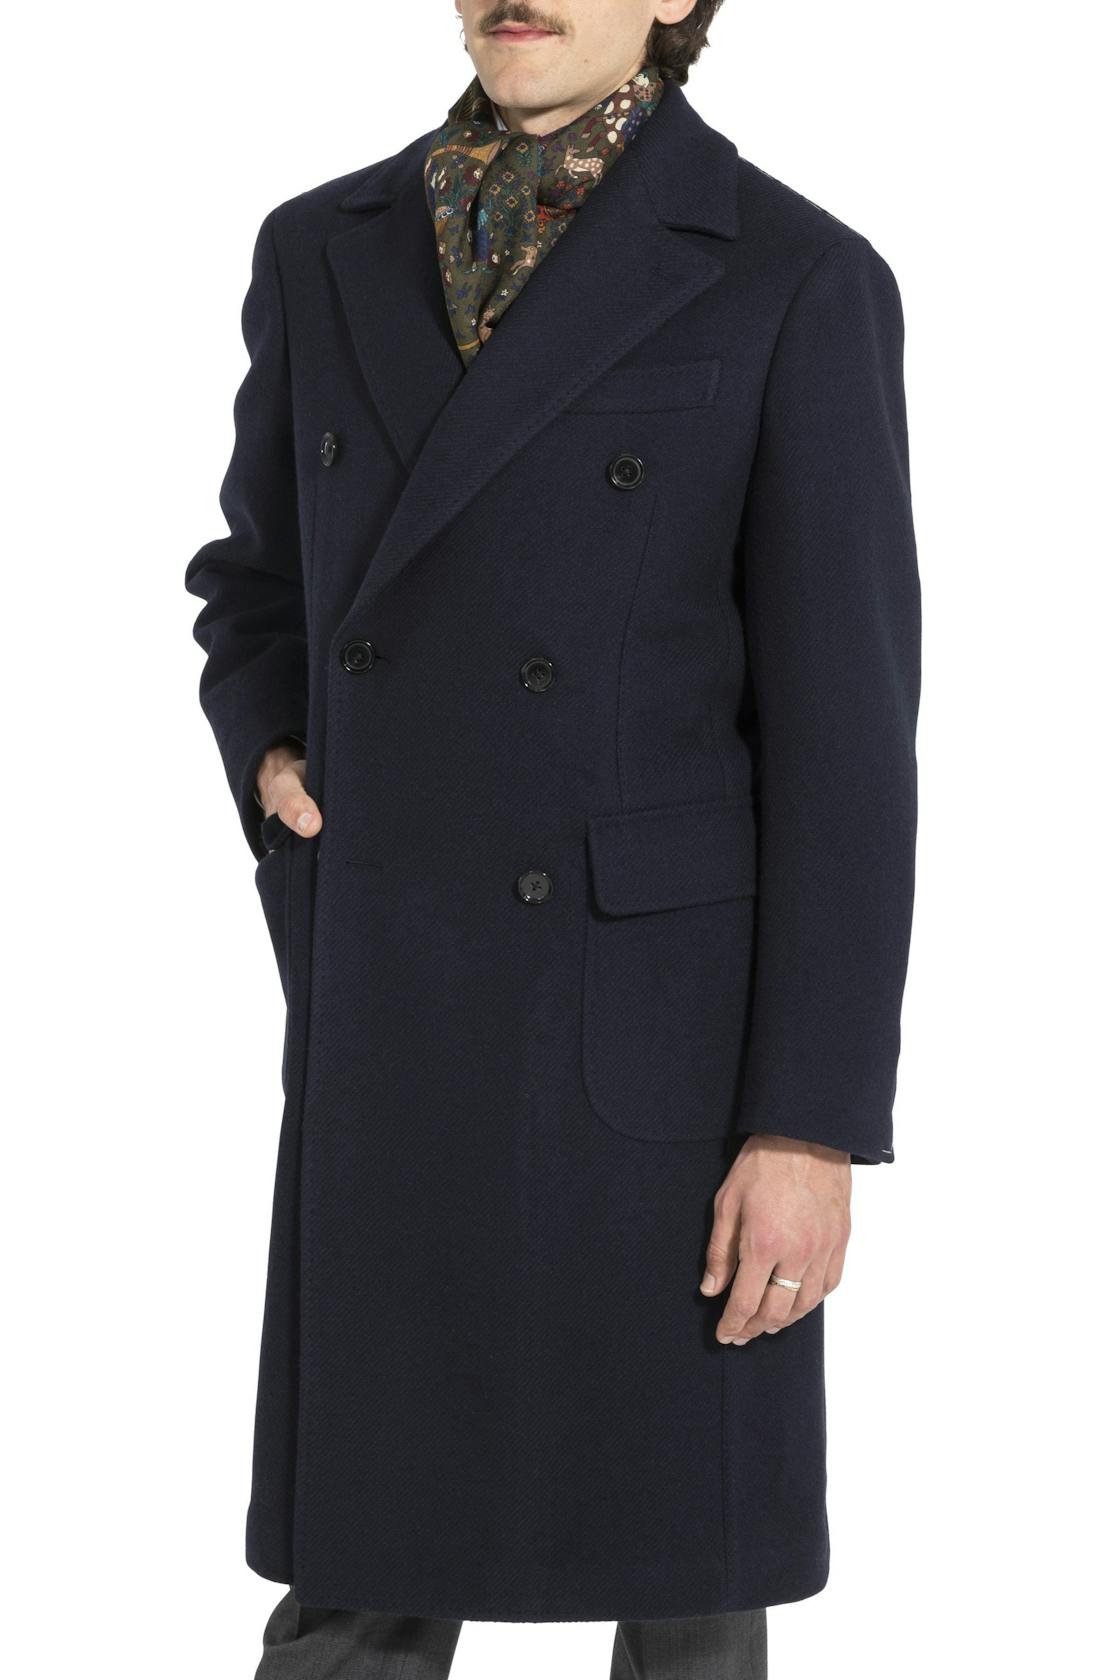 The Armoury by Ring Jacket RC66 Navy Wool Balloon Twill DB Overcoat